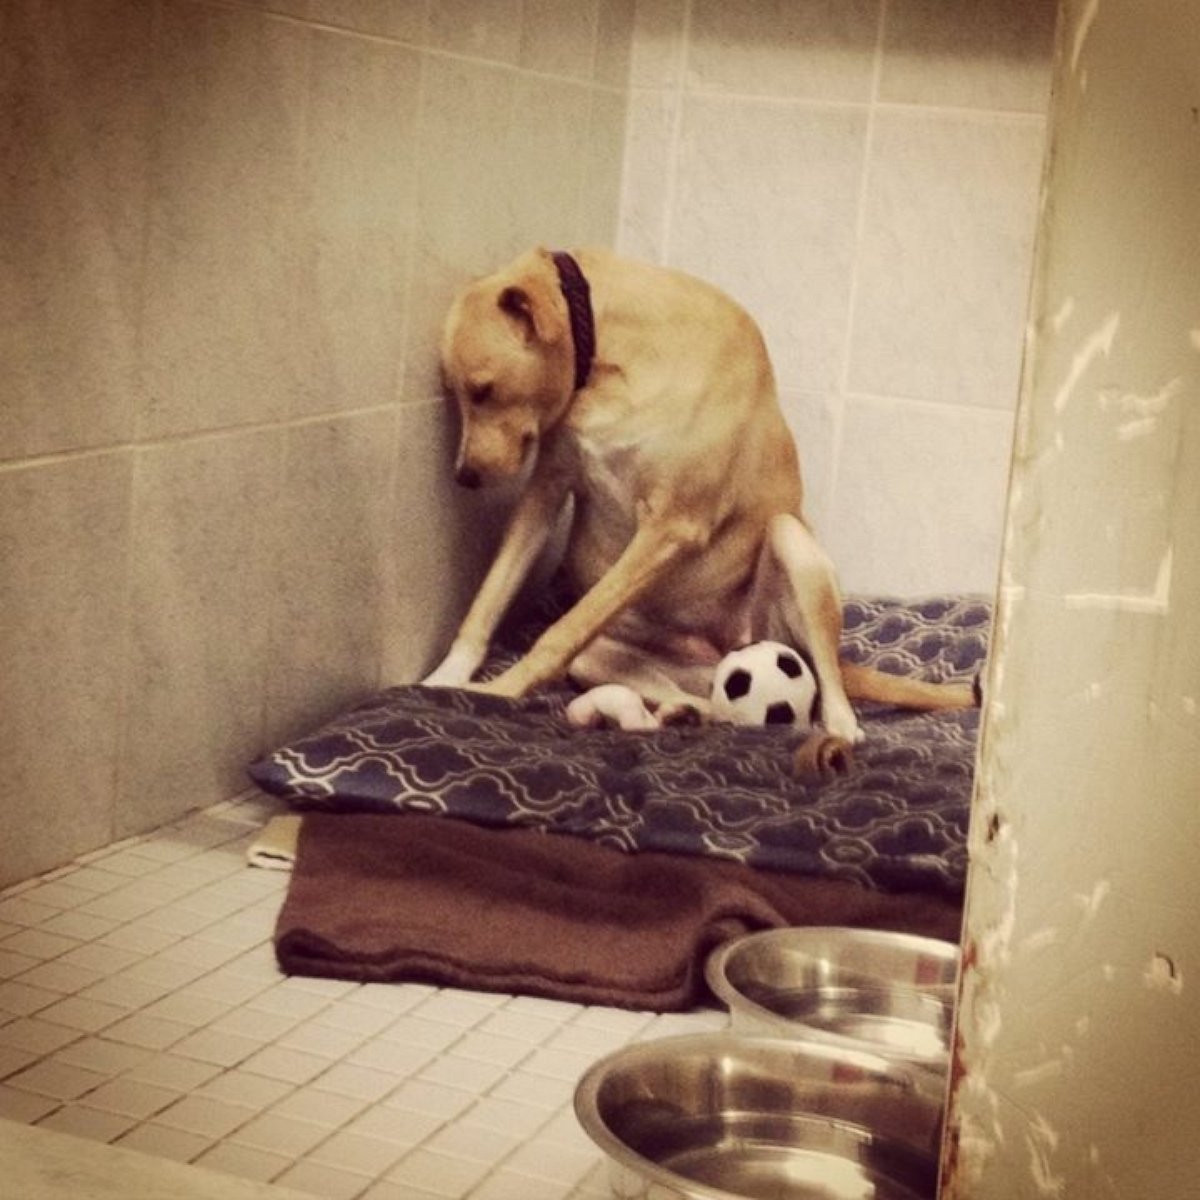 PHOTO: After a Facebook photo of "The Saddest Dog in the World" went viral, Lana the dog was placed in a temporary foster home and received over 2,000 adoption applications.